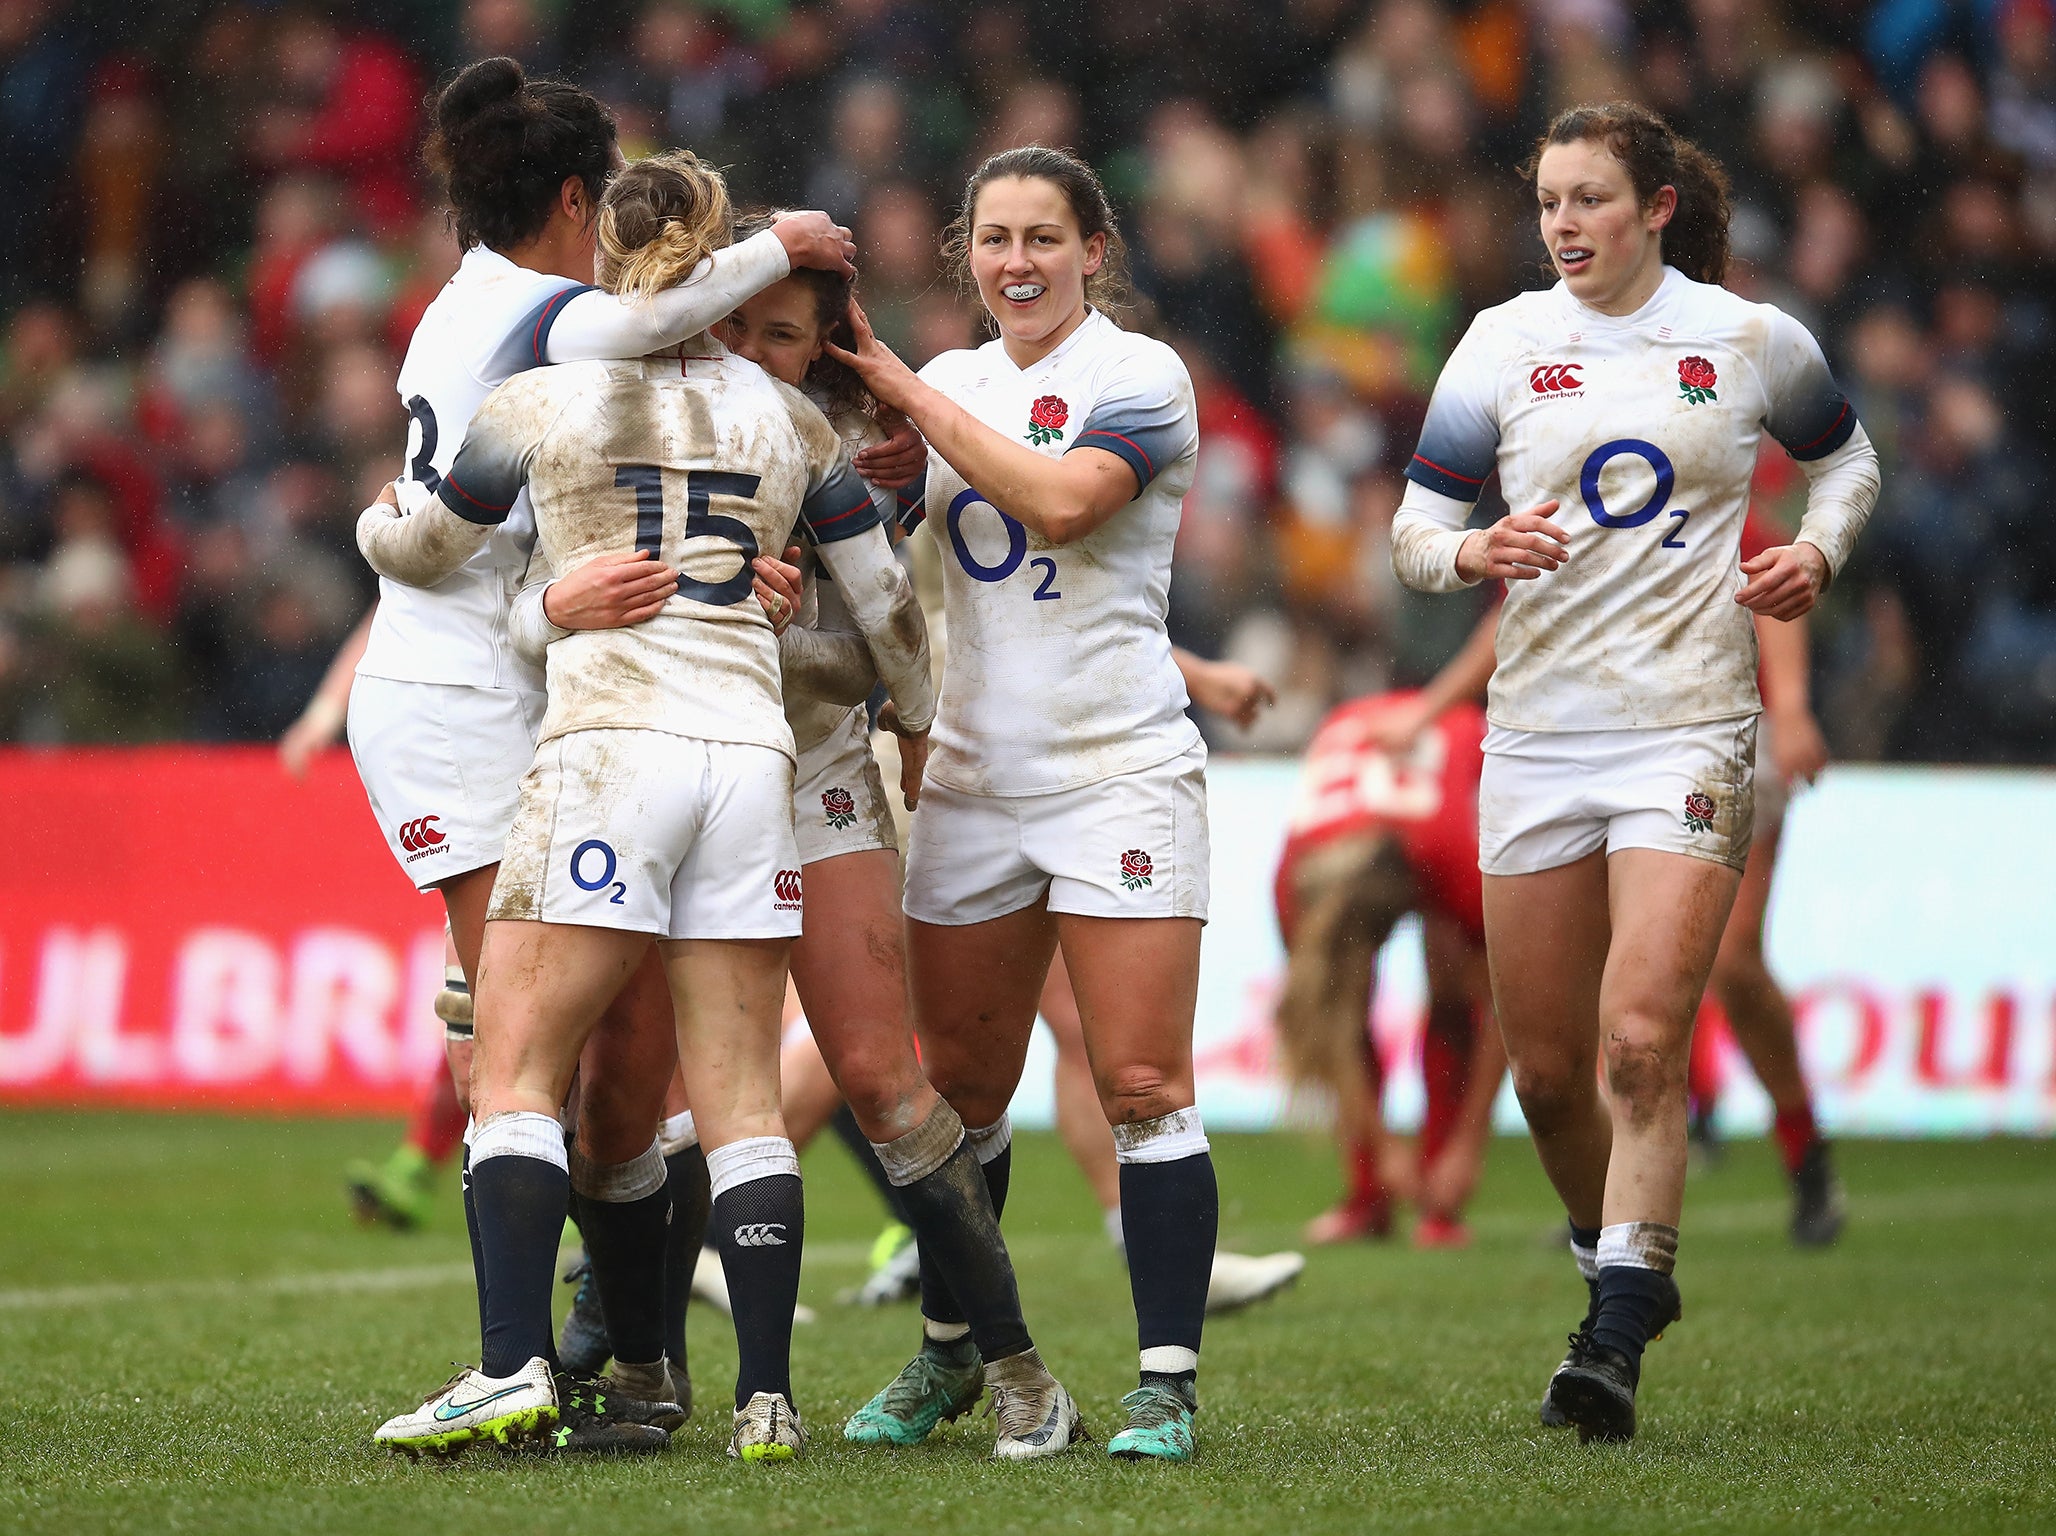 England&apos;s defence of Six Nations title continues with crushing win over Wales at Twickenham Stoop